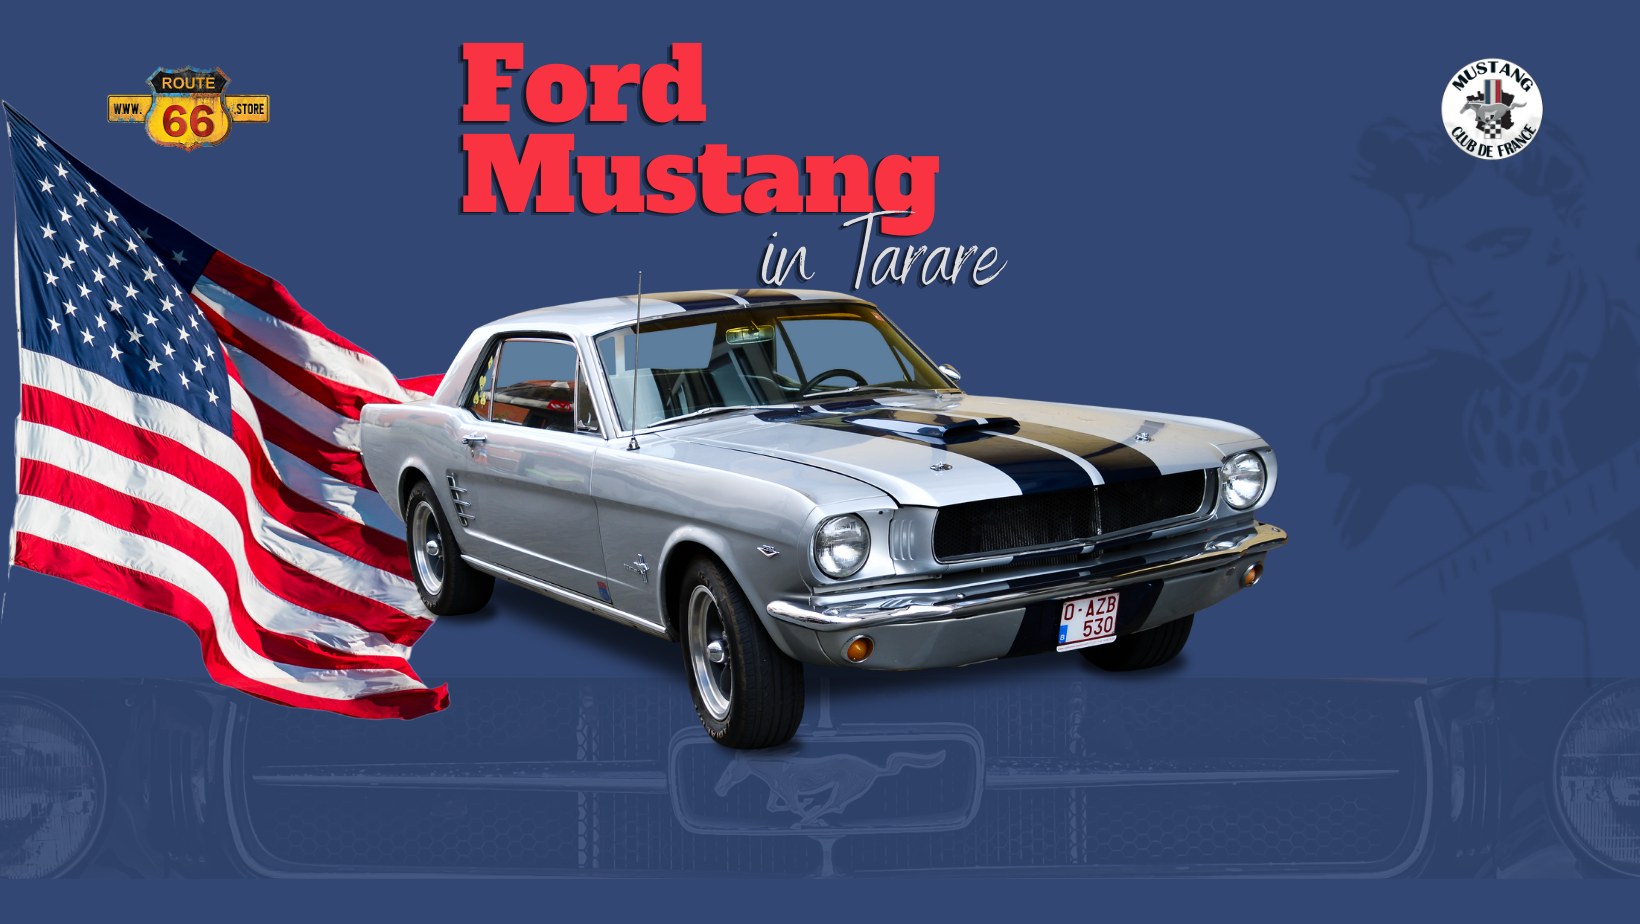 Mustang Day In Tarare